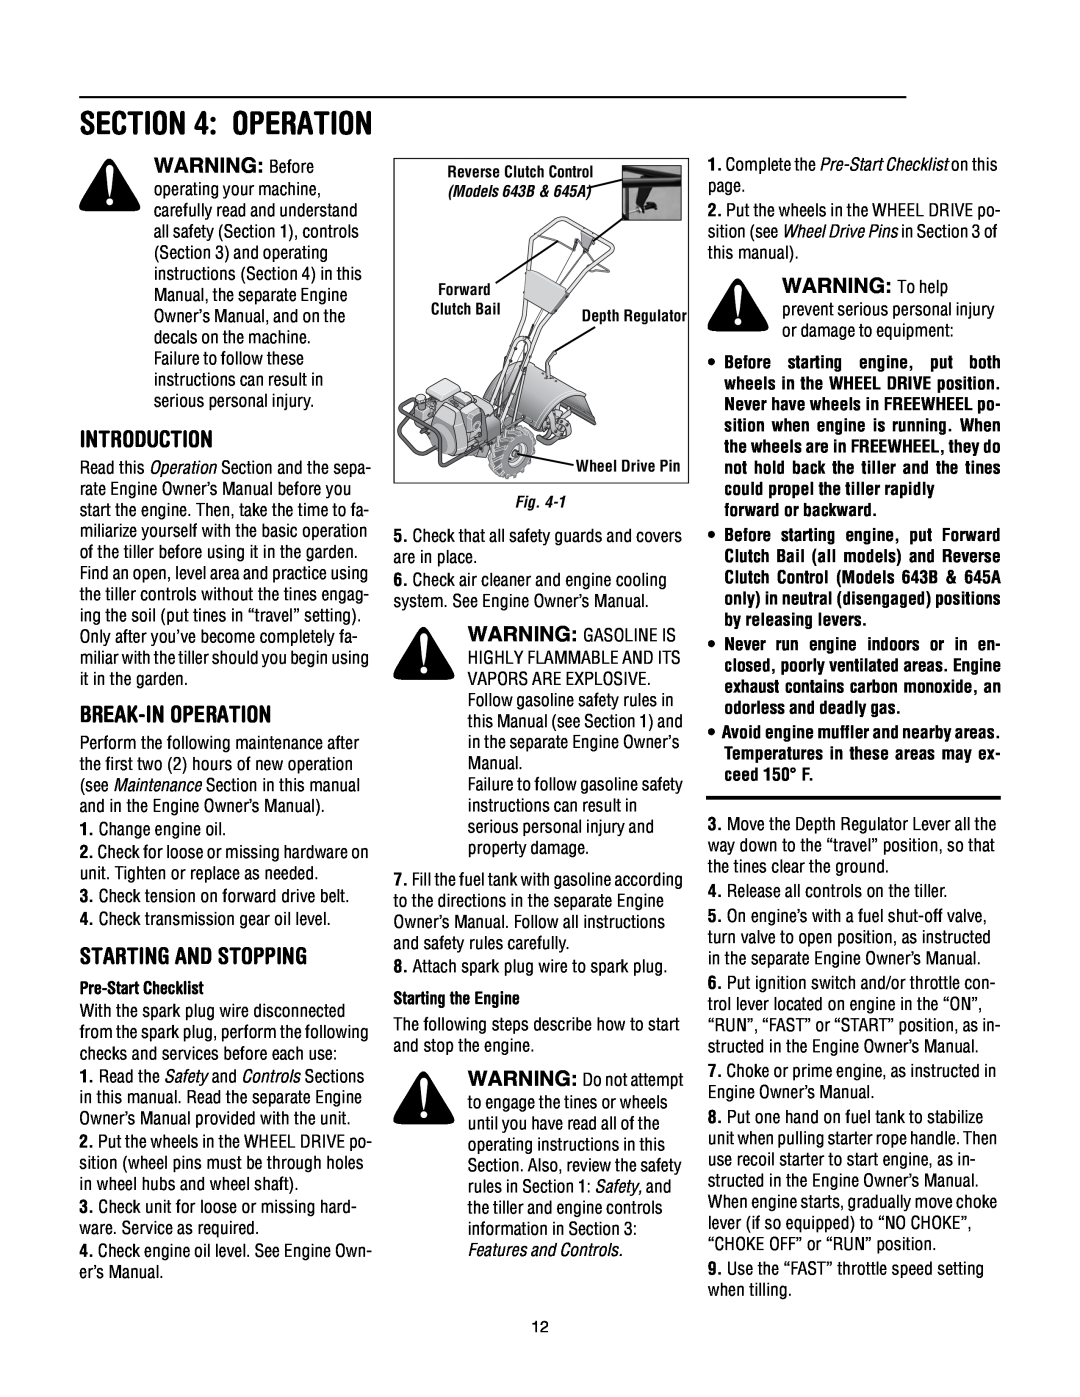 Troy-Bilt 643B Super Bronco Break-In Operation, Starting And Stopping, WARNING To help, Pre-Start Checklist, Introduction 